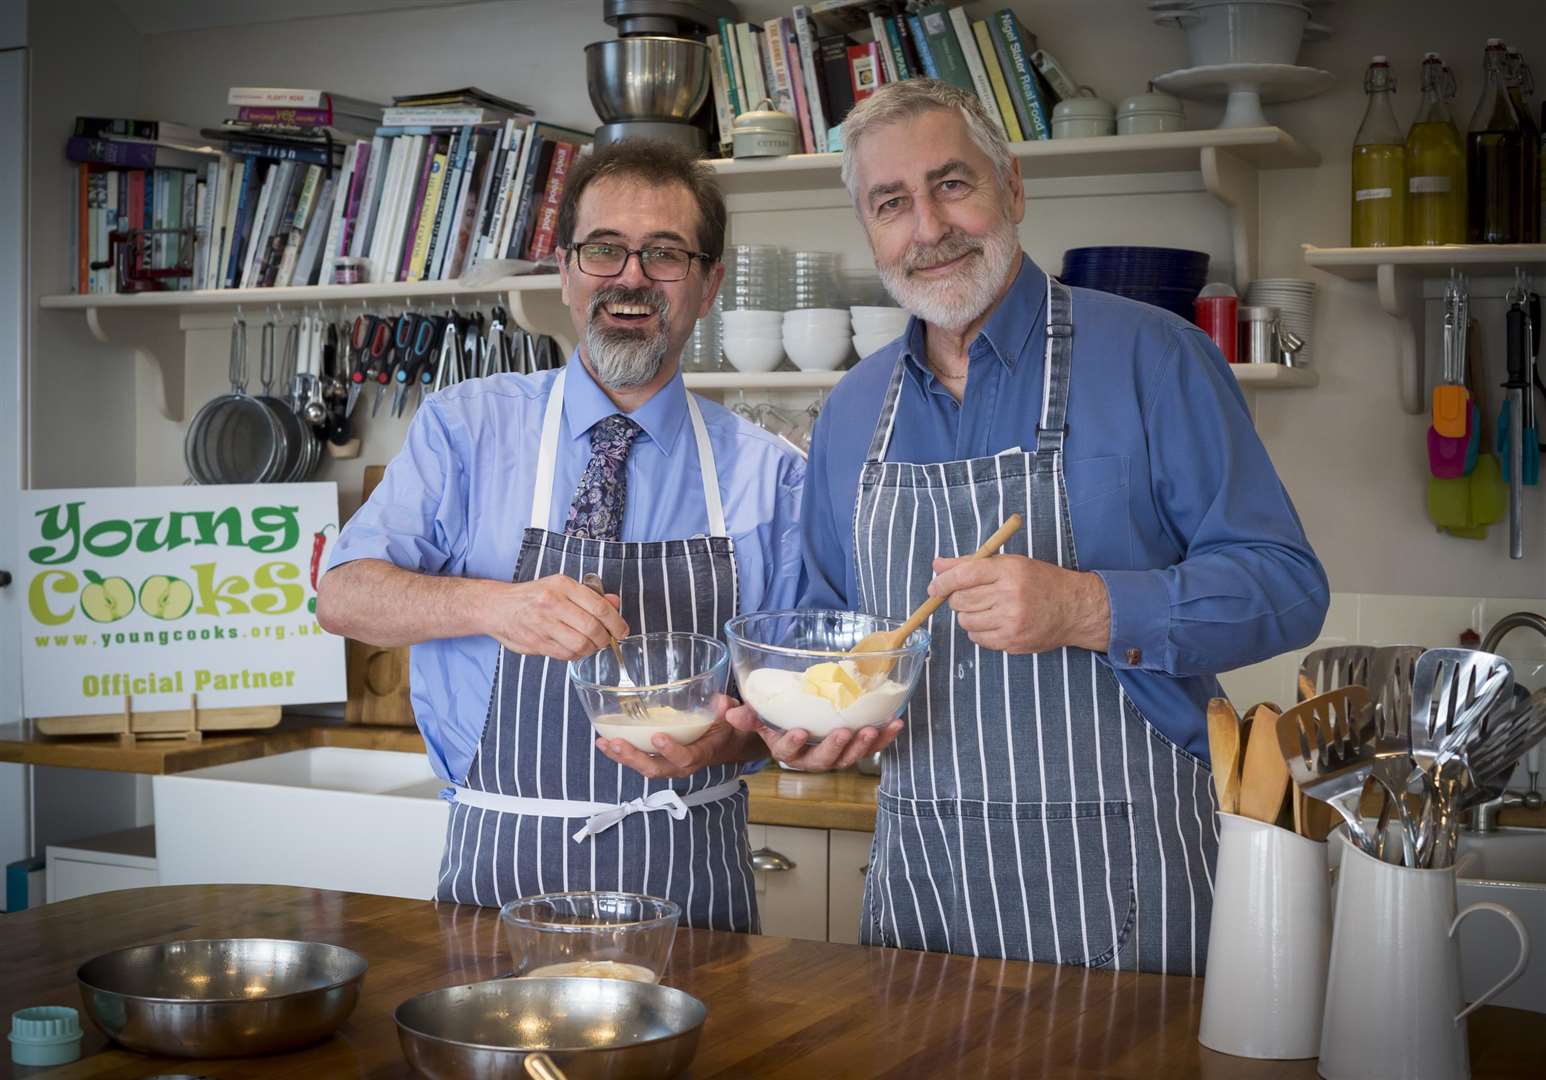 From left, Seth Proctor and Jim Ratchford of Licensing Consultancy Services which is supporting Young Cooks.